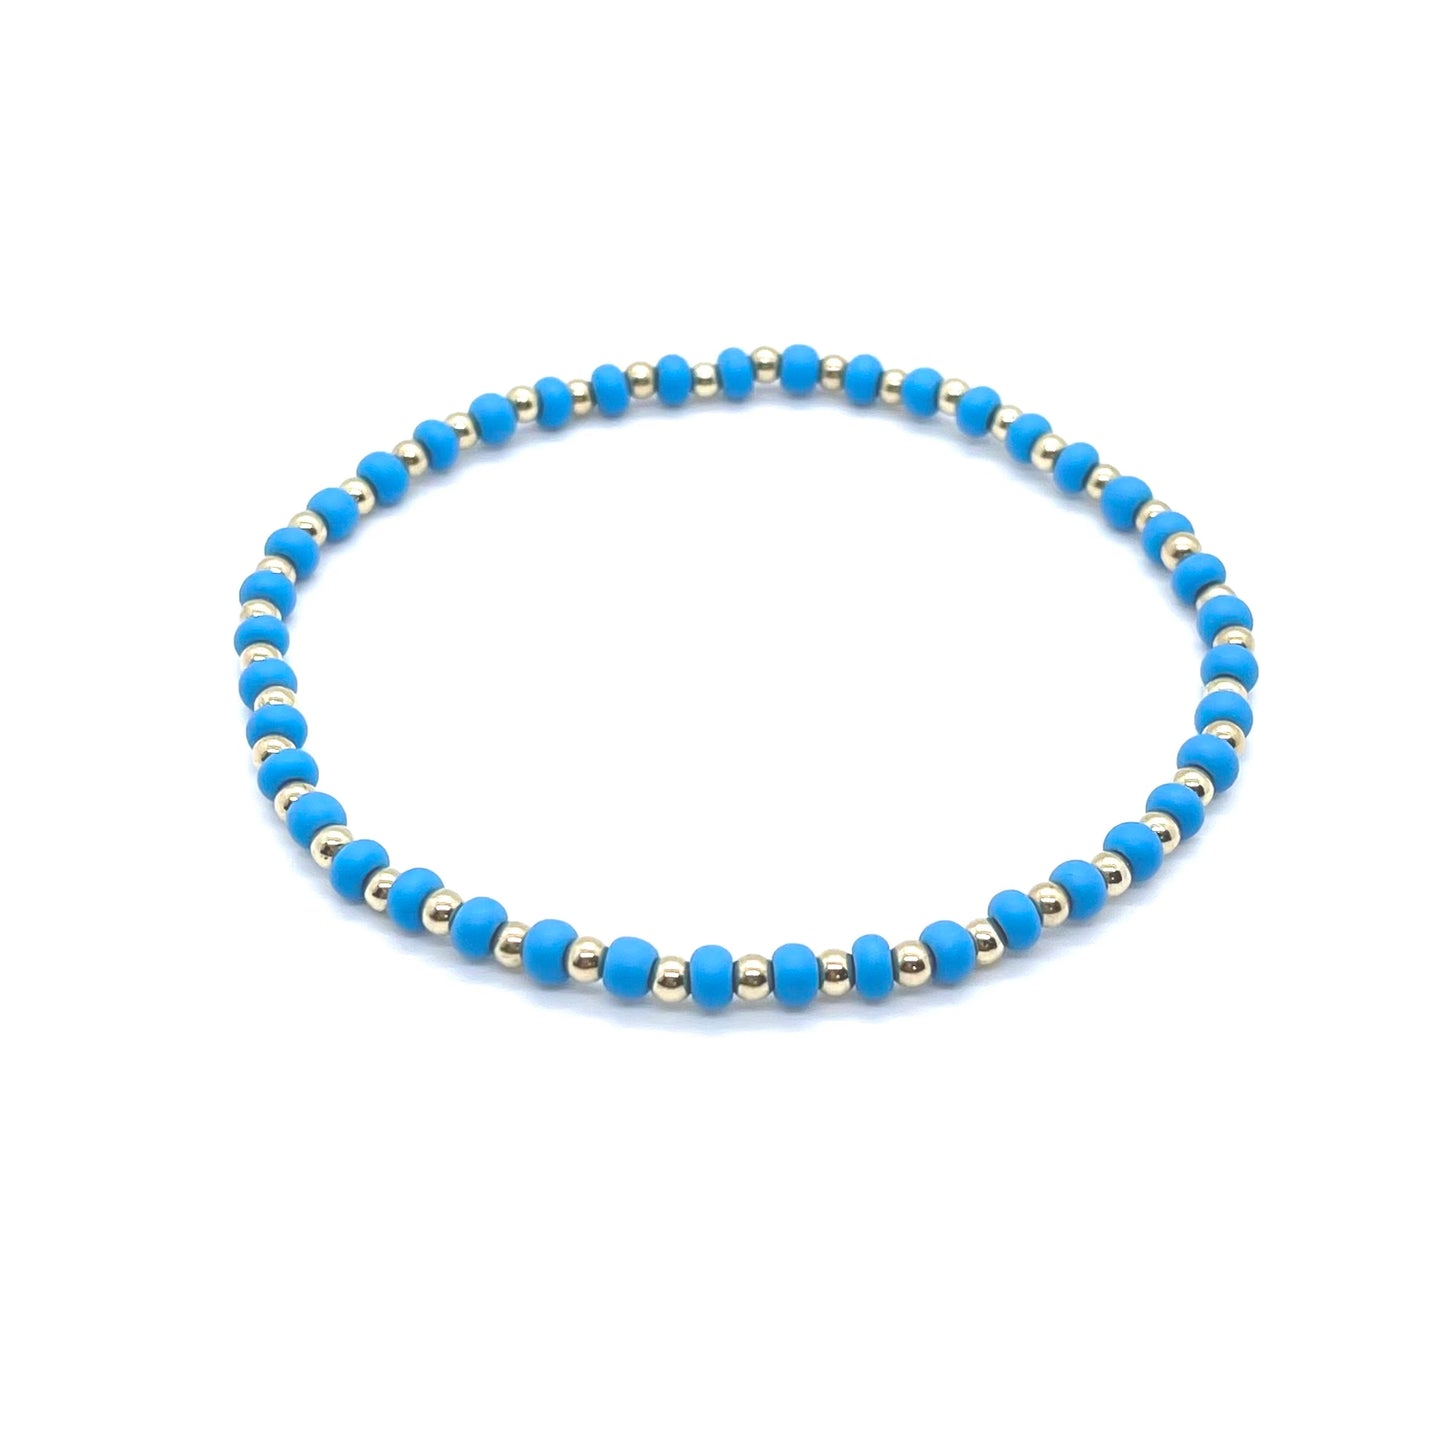 Gold fill anklet with alternating matte blue seed beads on elastic stretch cord. Handmade in NYC.